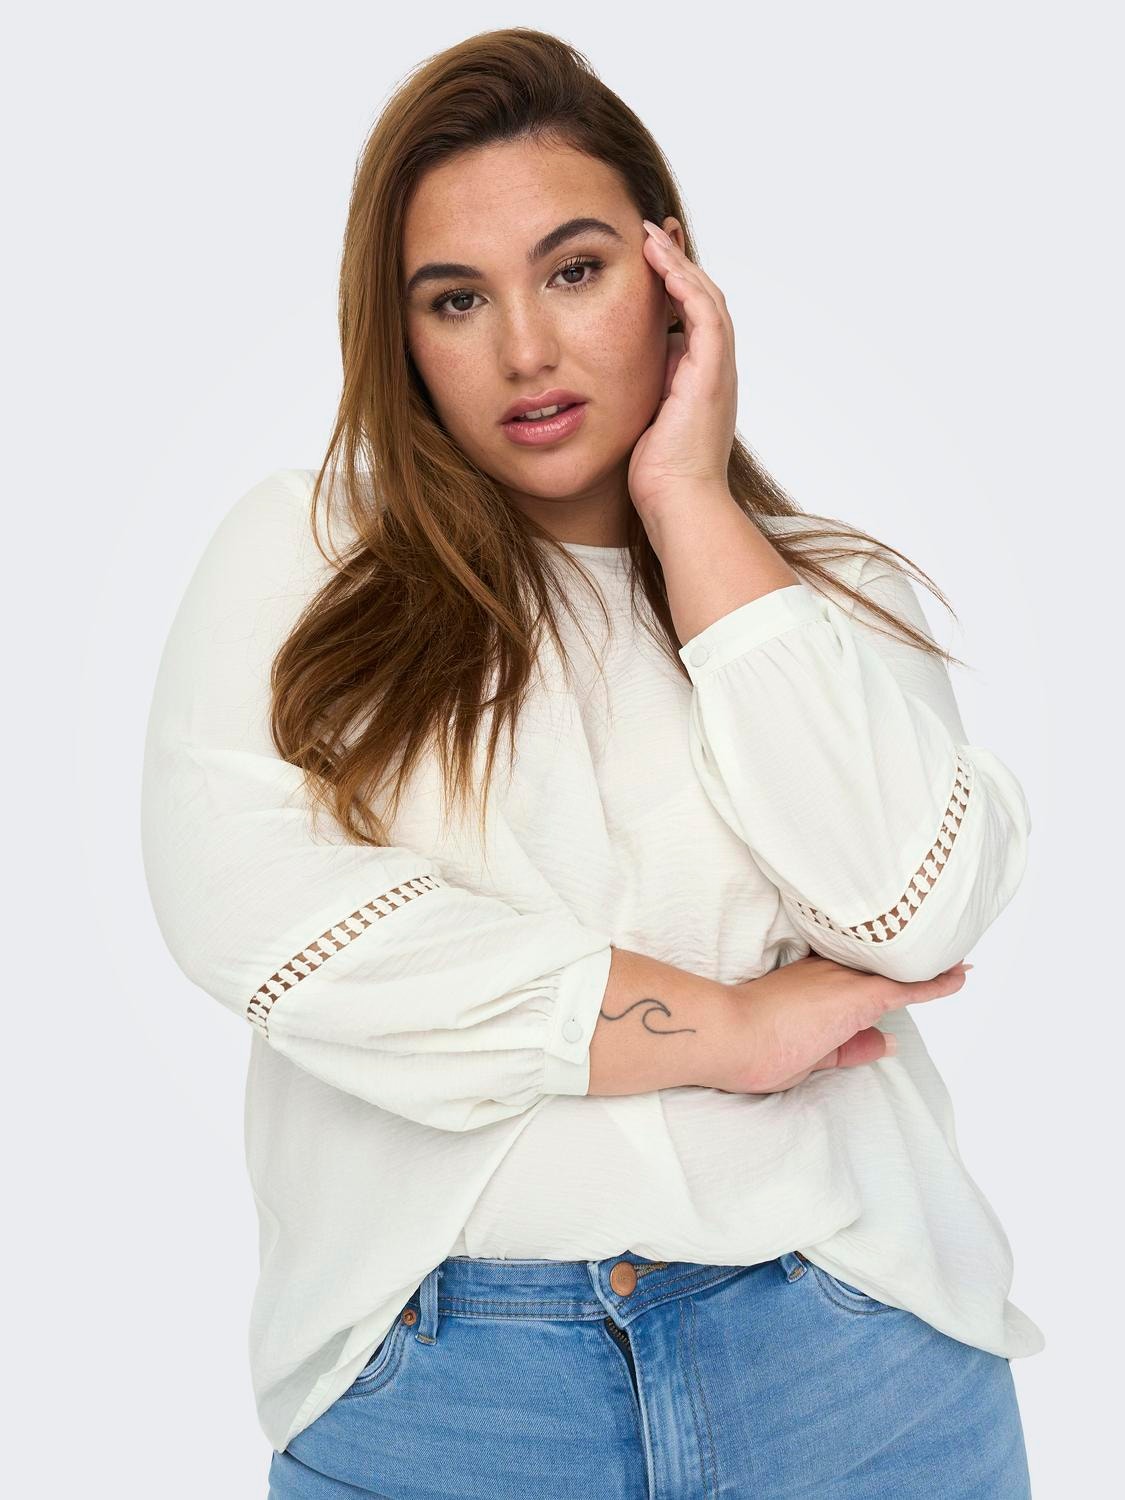 ONLY Curvy detailed top -Cloud Dancer - 15284957